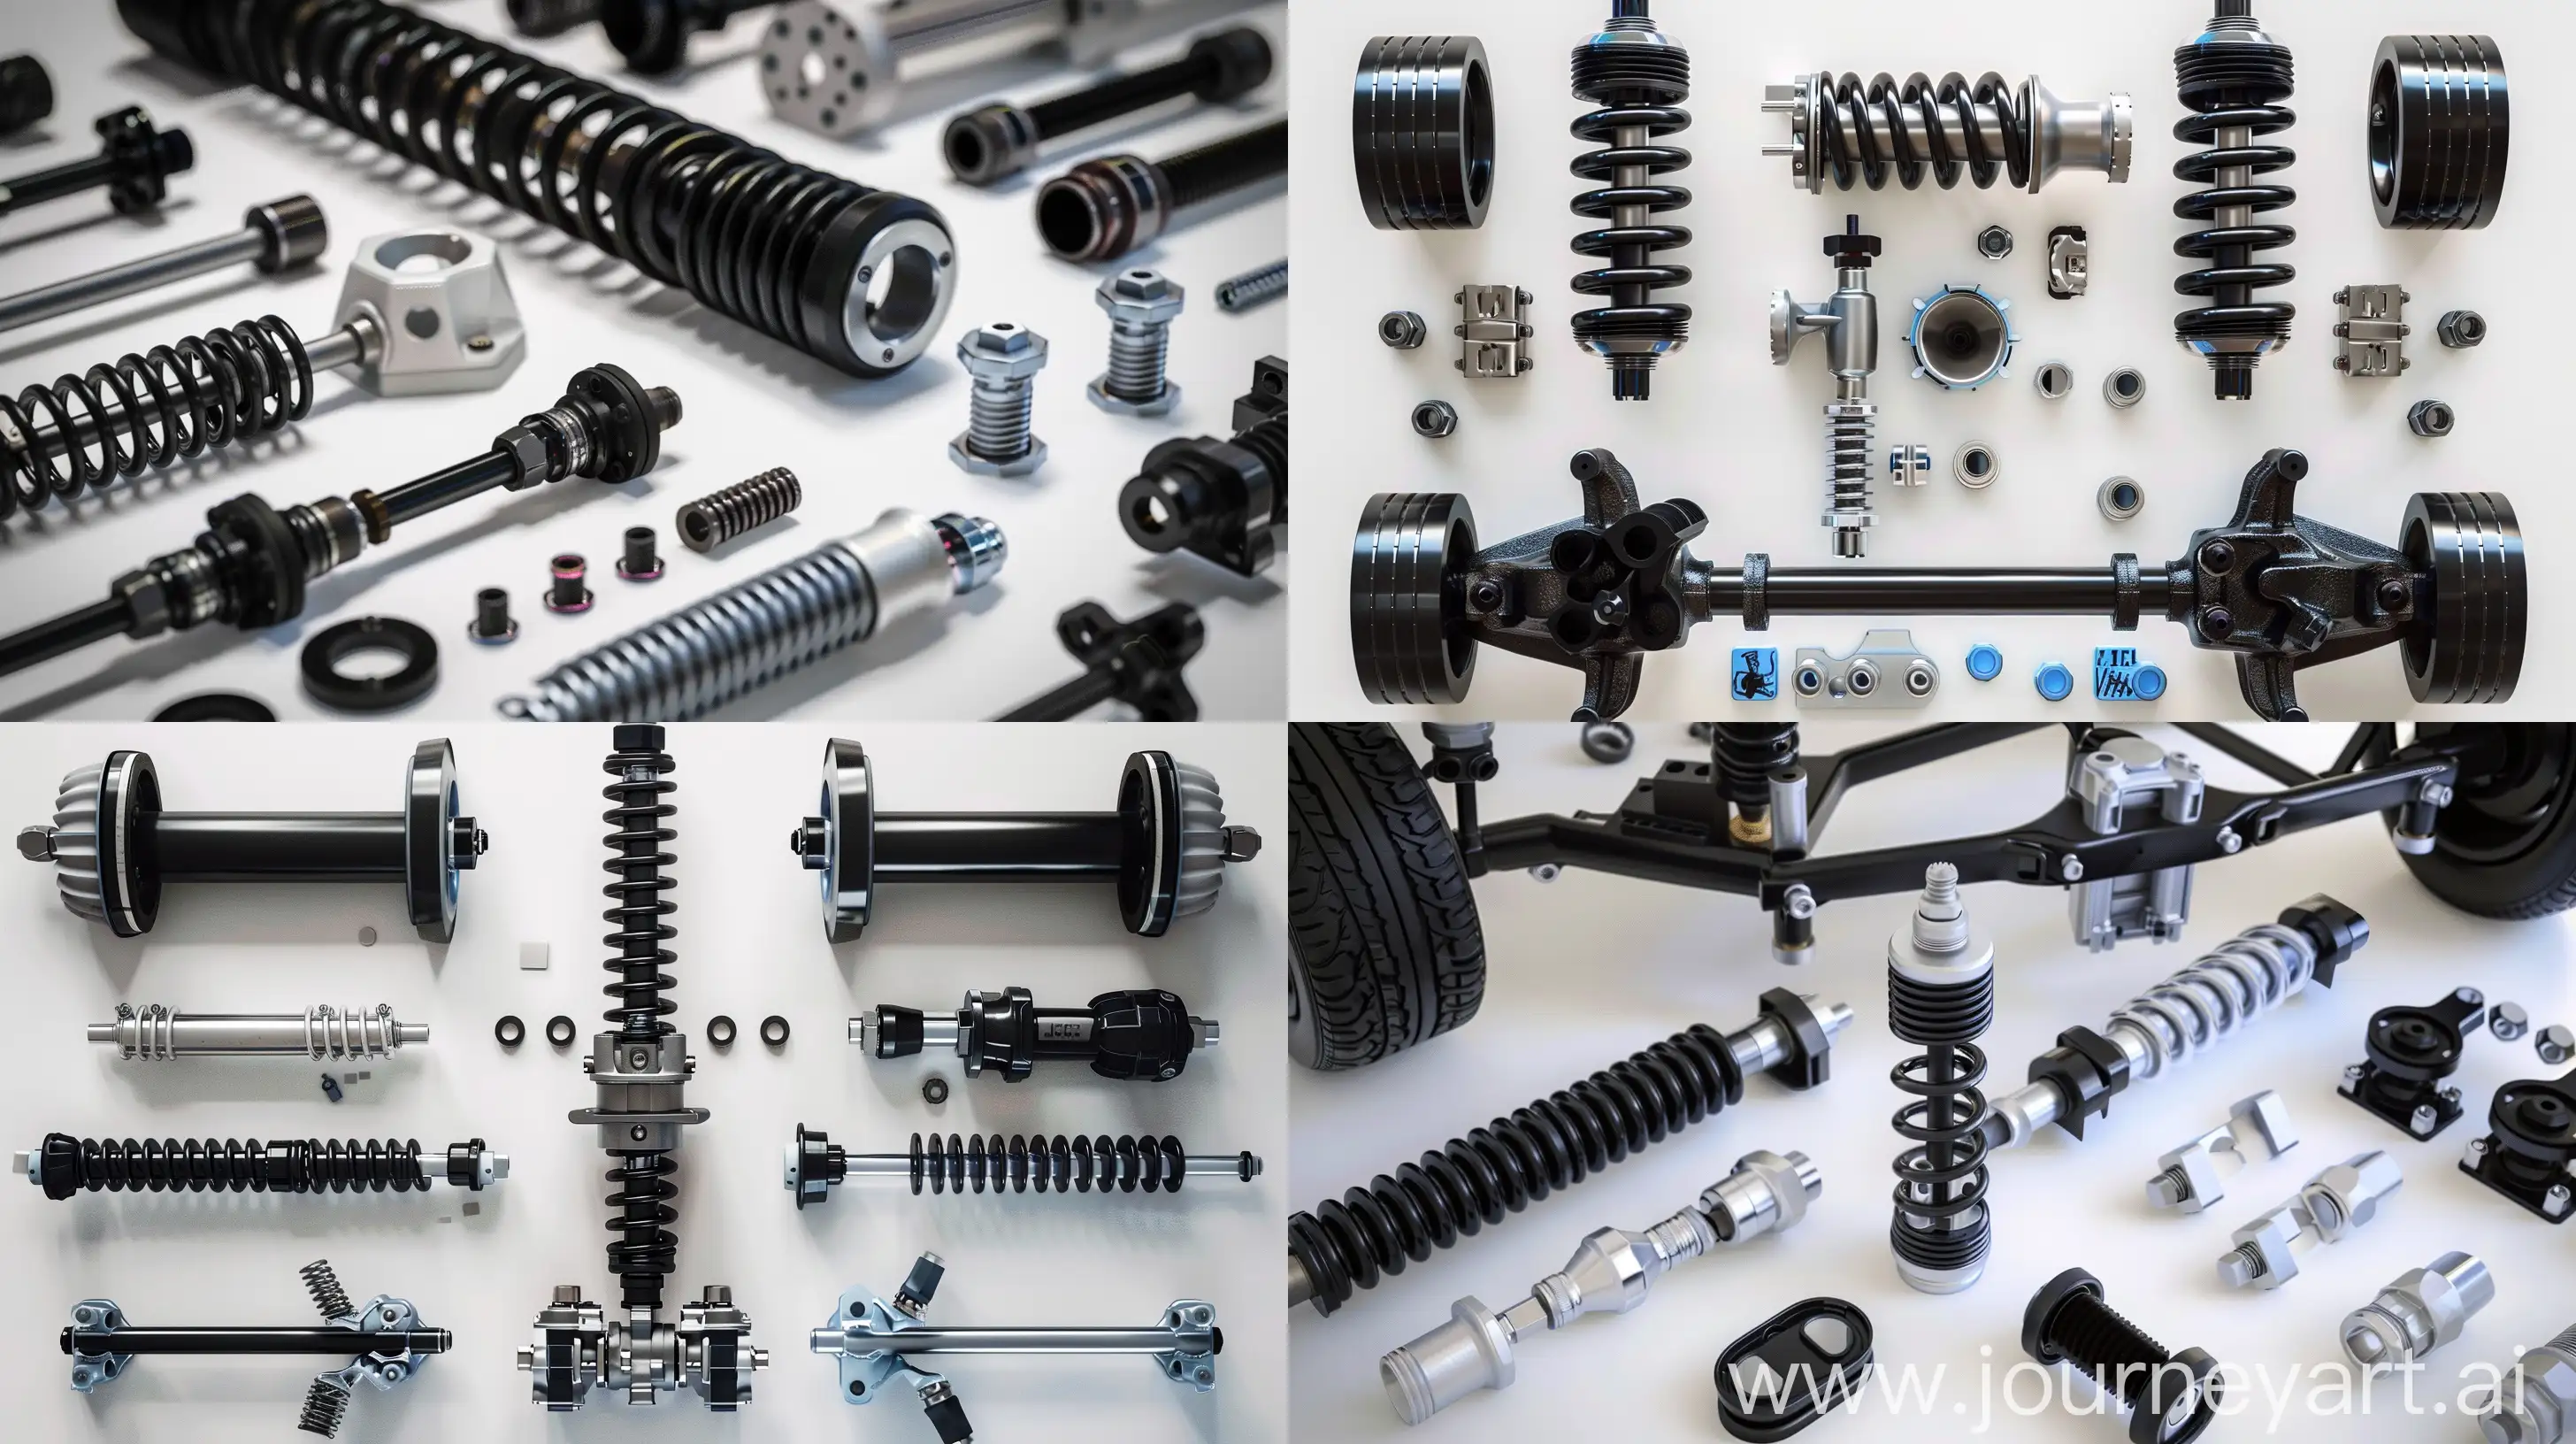 CloseUp-of-Car-Suspension-Components-Detailed-Automotive-Engineering-Display